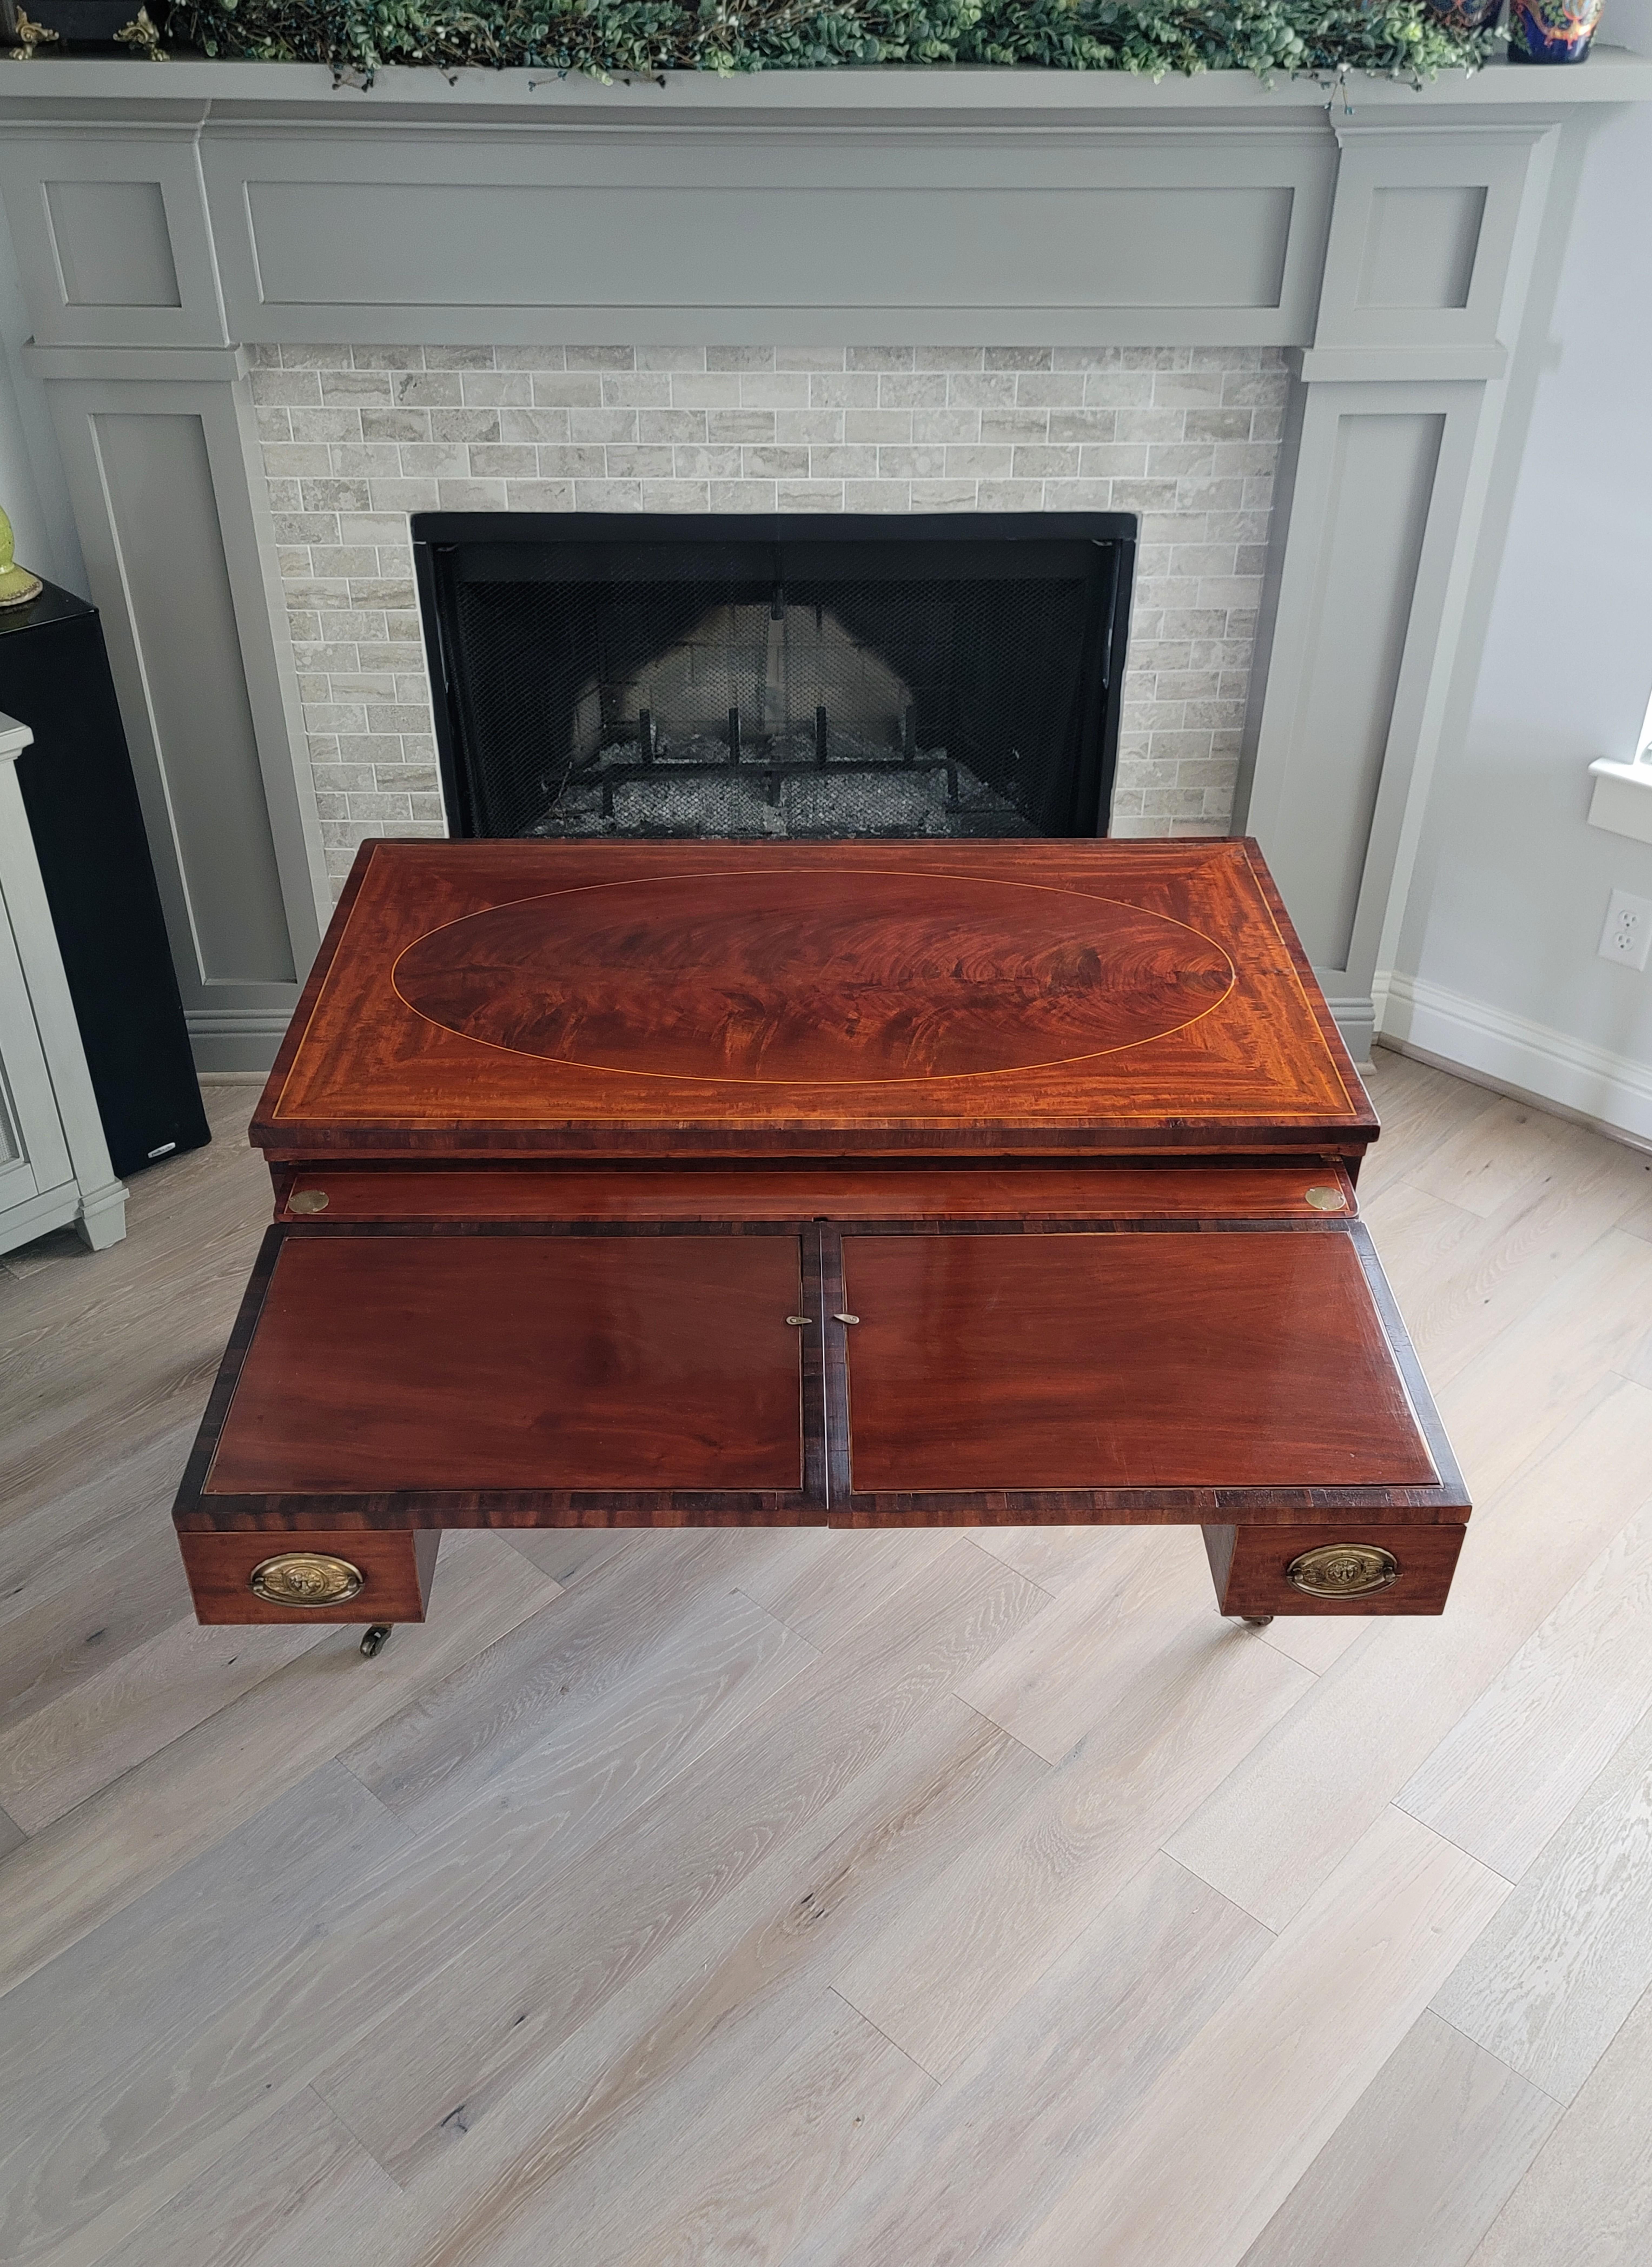 Important Beau Brummell Regency Period Flame Mahogany Gentleman's Dressing Table In Good Condition For Sale In Forney, TX